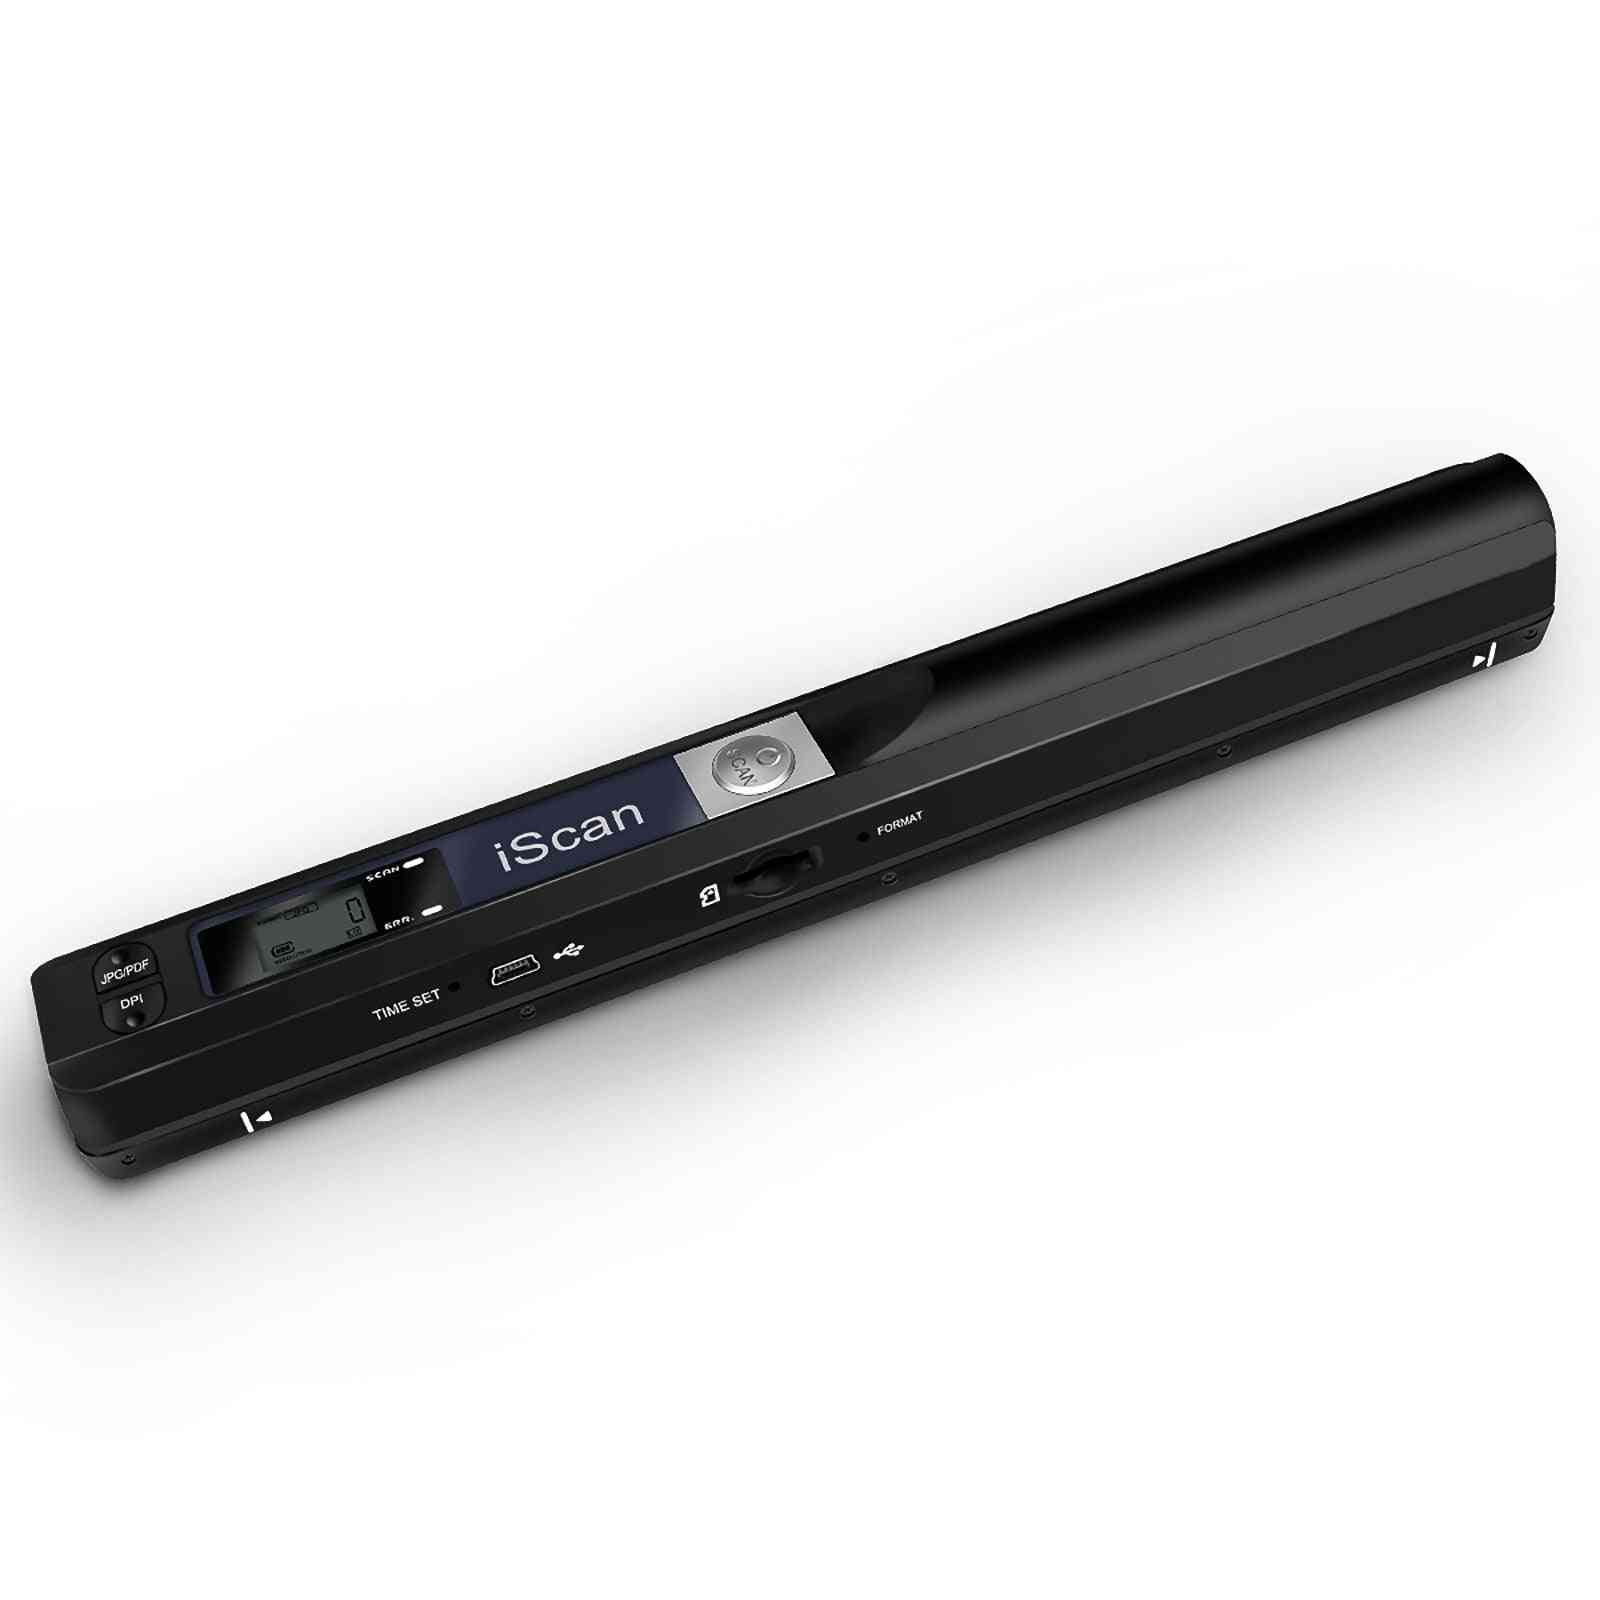 Creative Handheld Mobile Document Image A4 Scanner